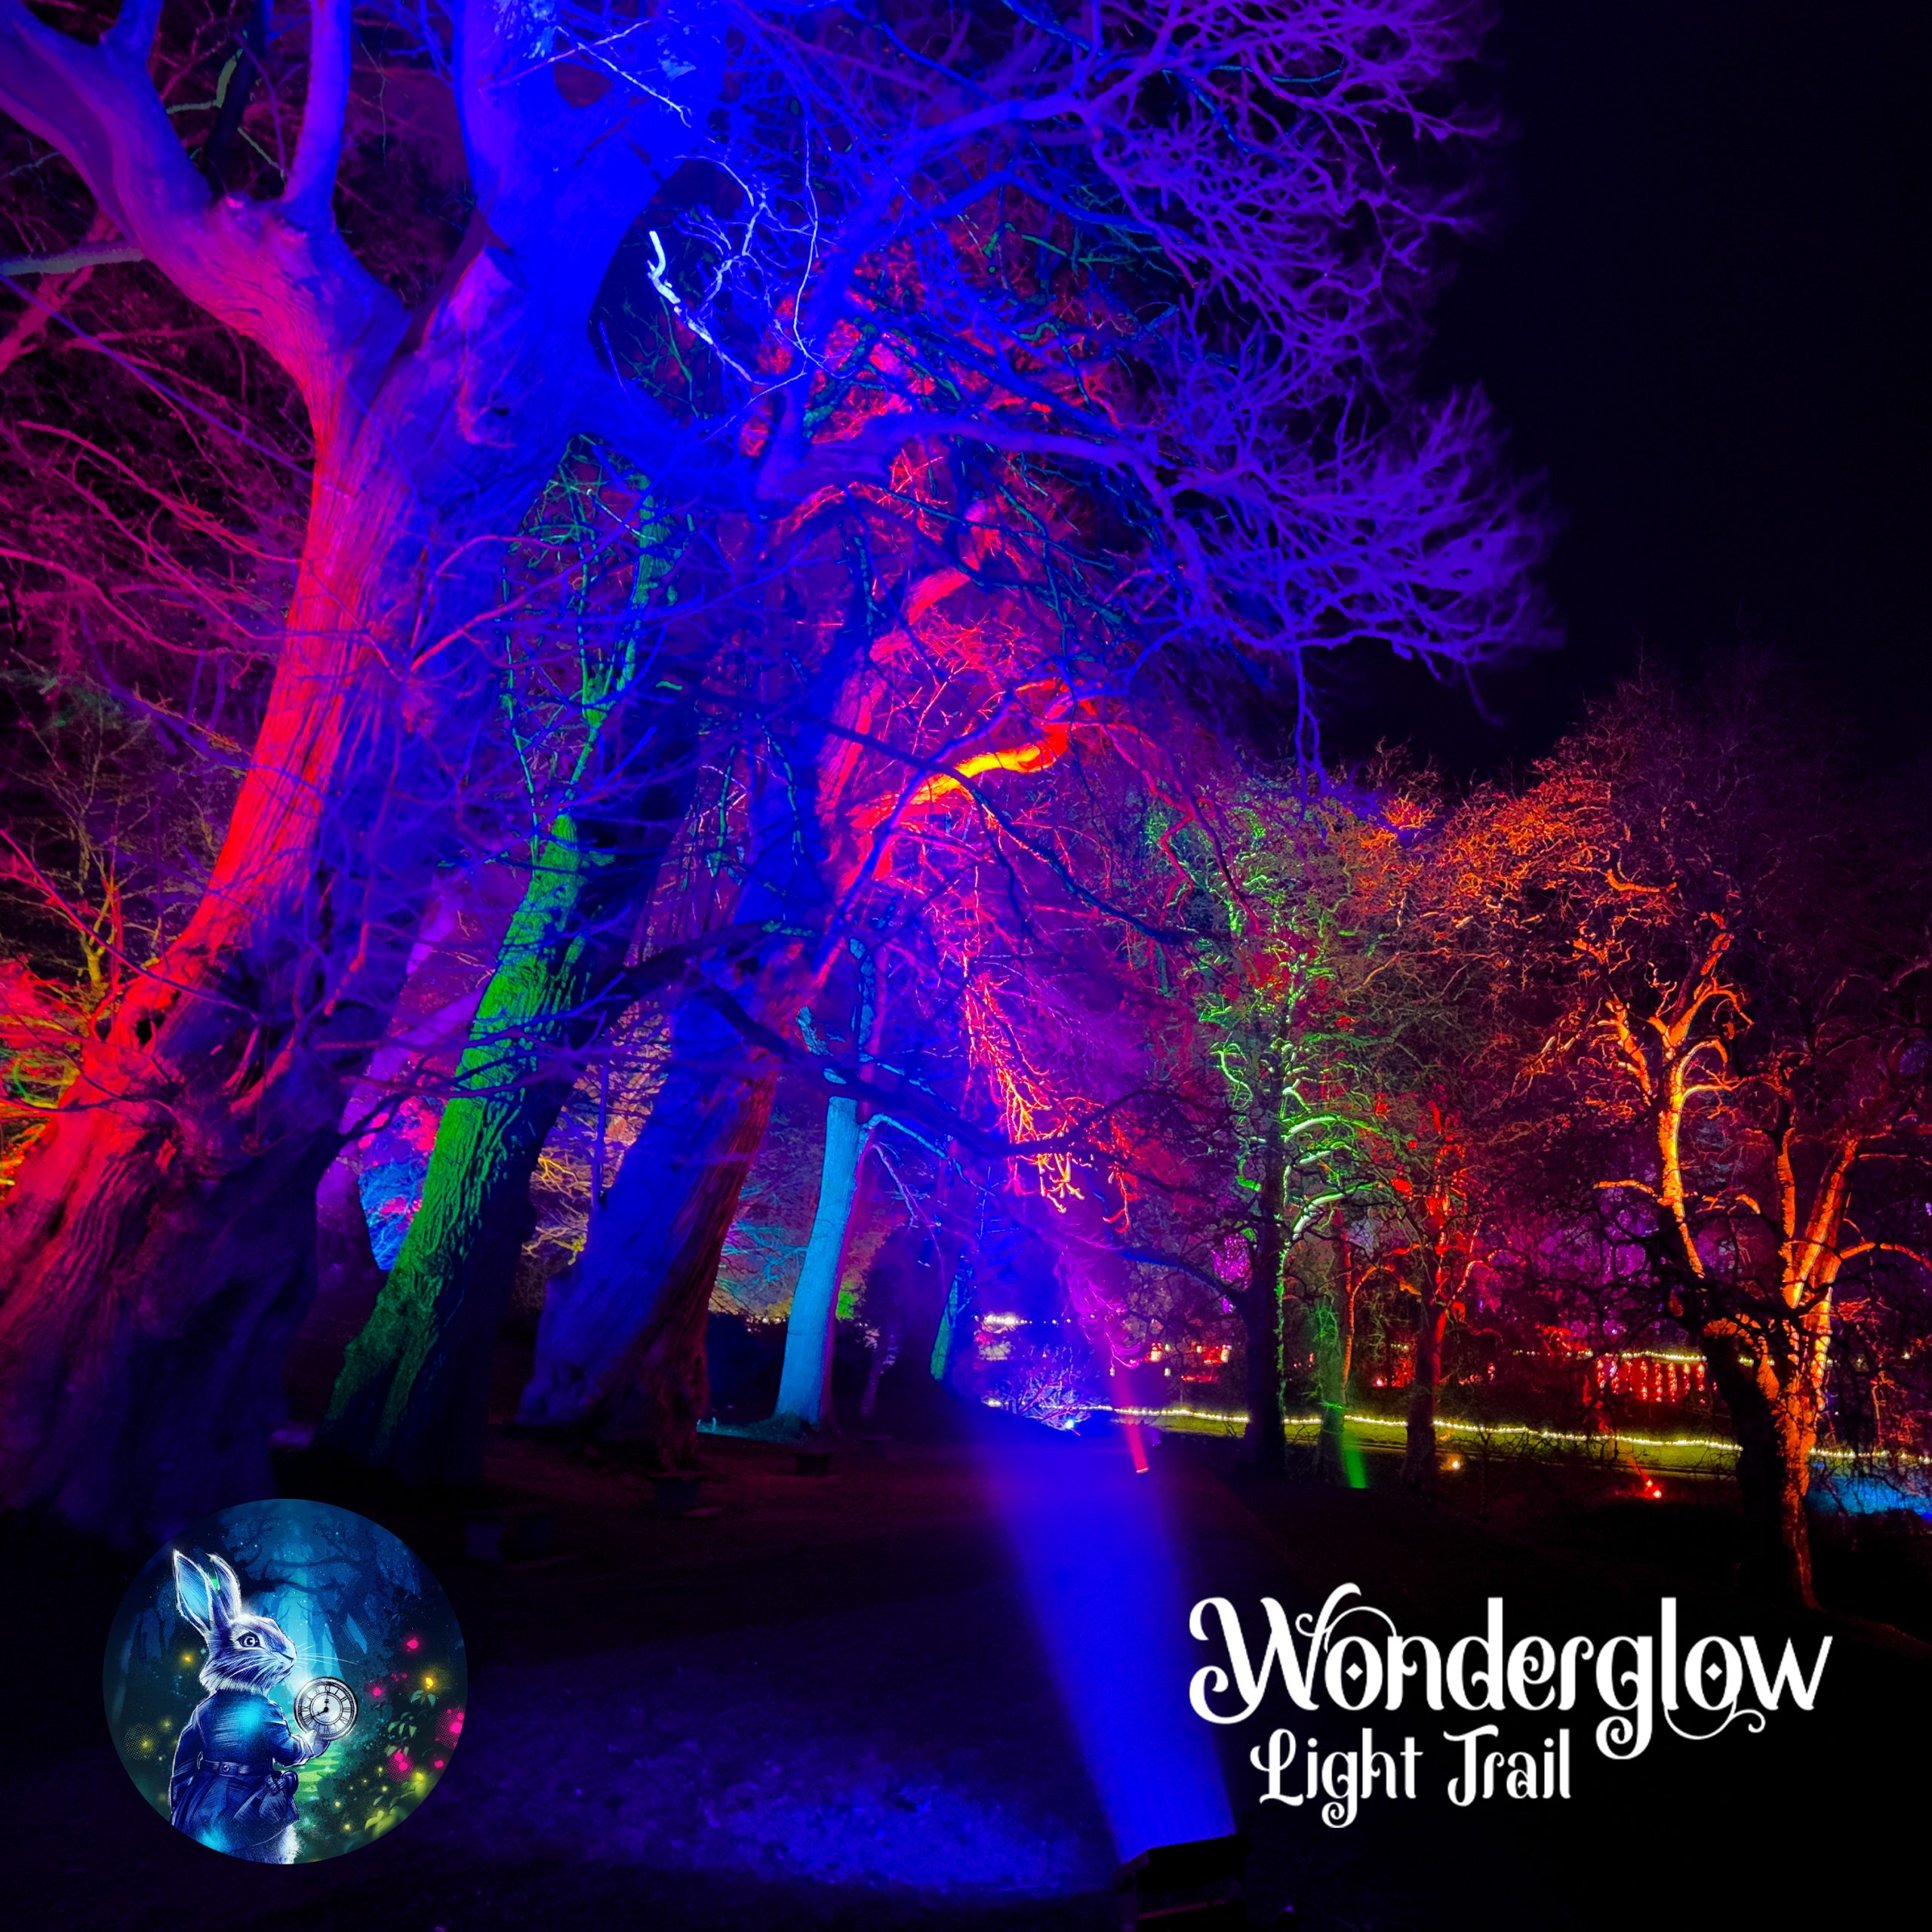 Trees lit up at the Wonderglow Light Trail Experience